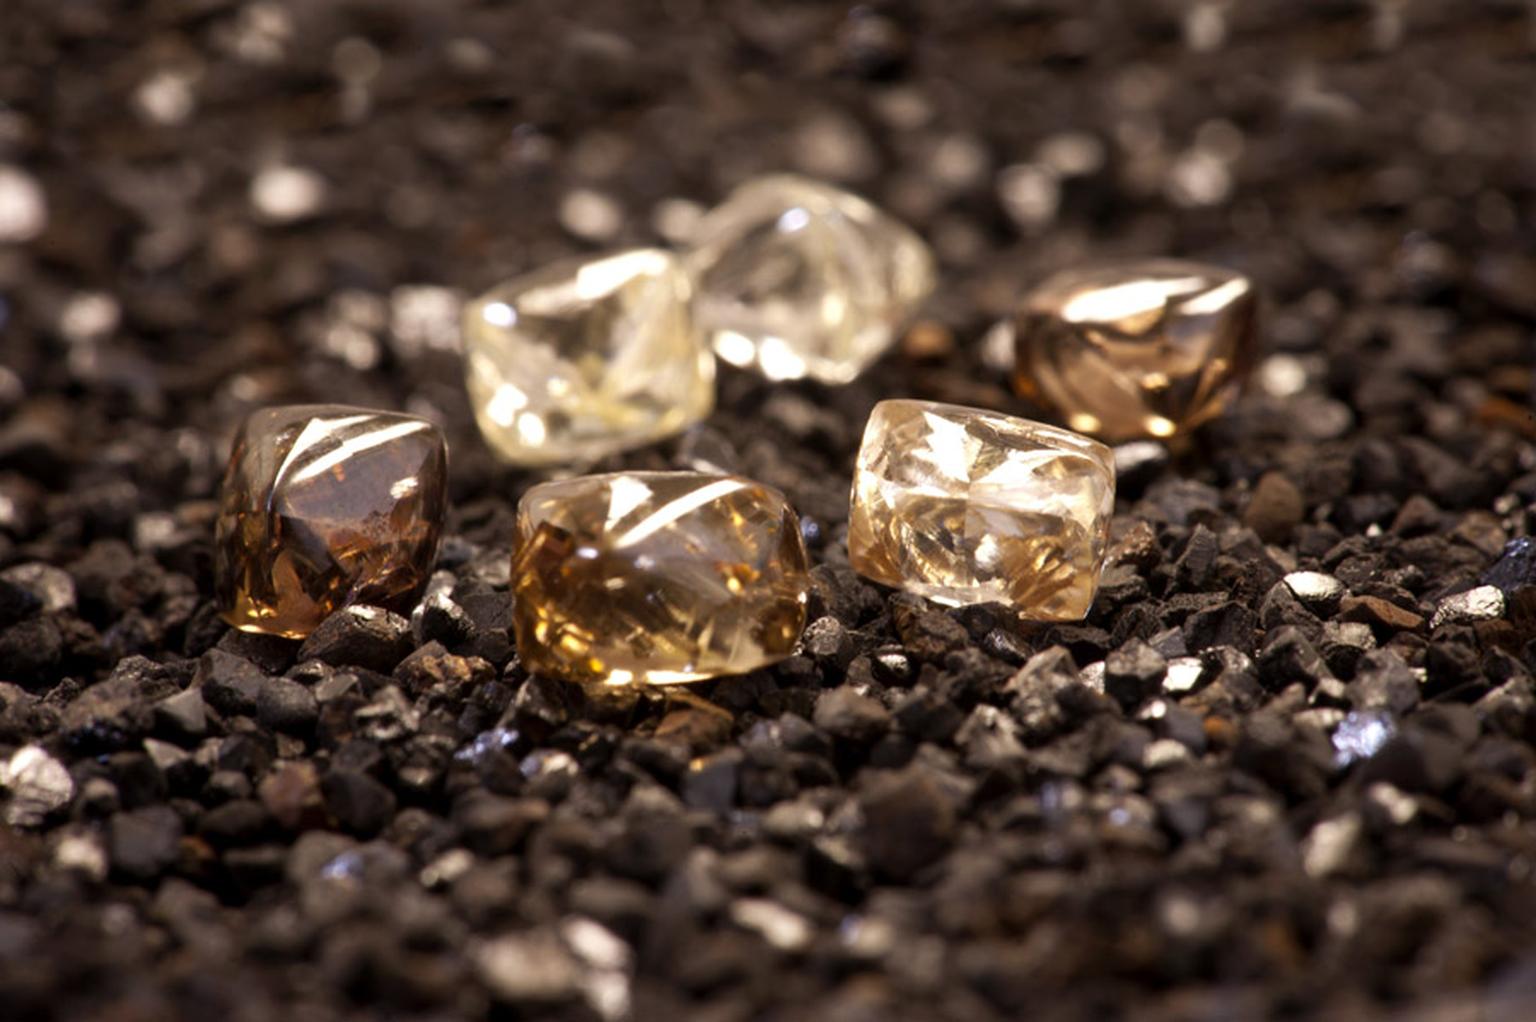 First-diamond-samples-from-the-Bunder-project-located-in-the-Bundelkhand-region-of-Madhya-Pradesh-India--NXPowerLite.jpg